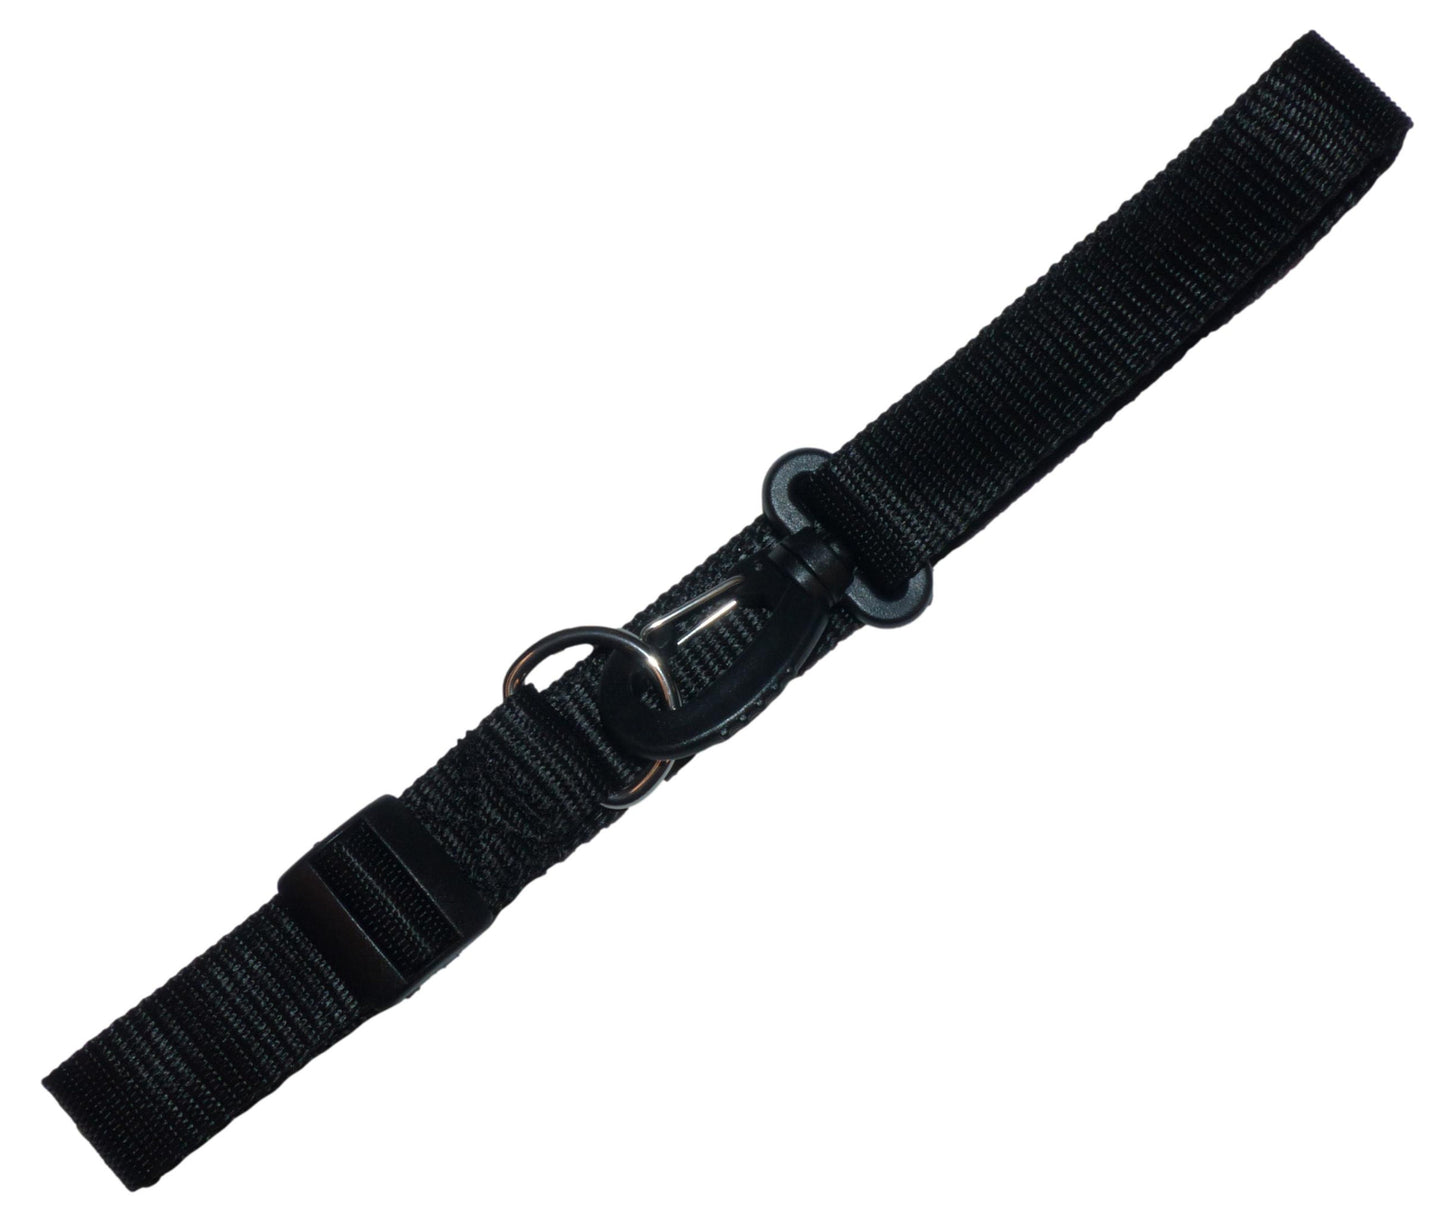 25mm Webbing Strap with Snap Hook & D Ring in black